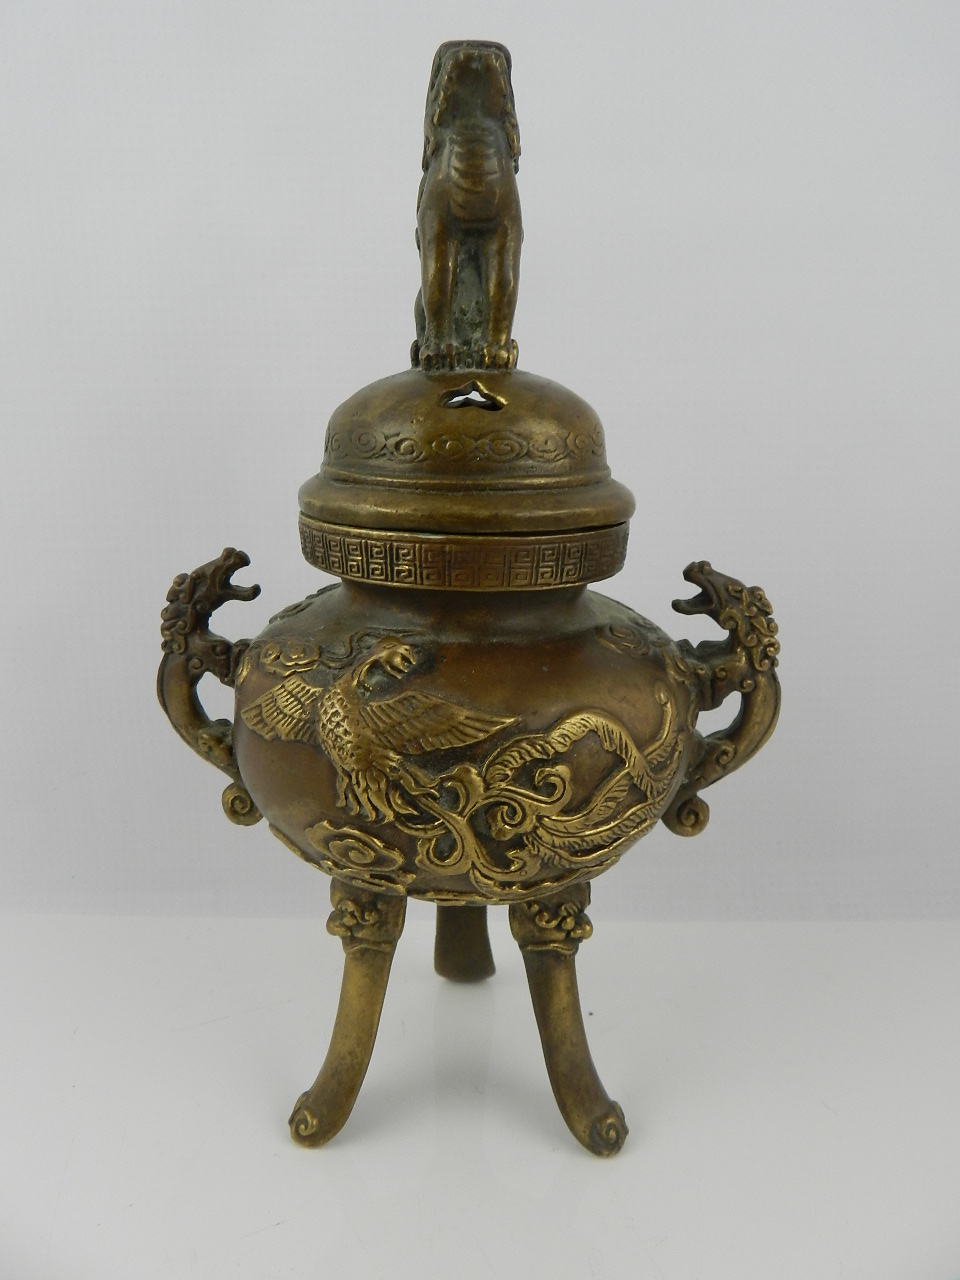 A Chinese bronze incense burner, pierced kylin mounted dome top lid, twin dragon handles, relief